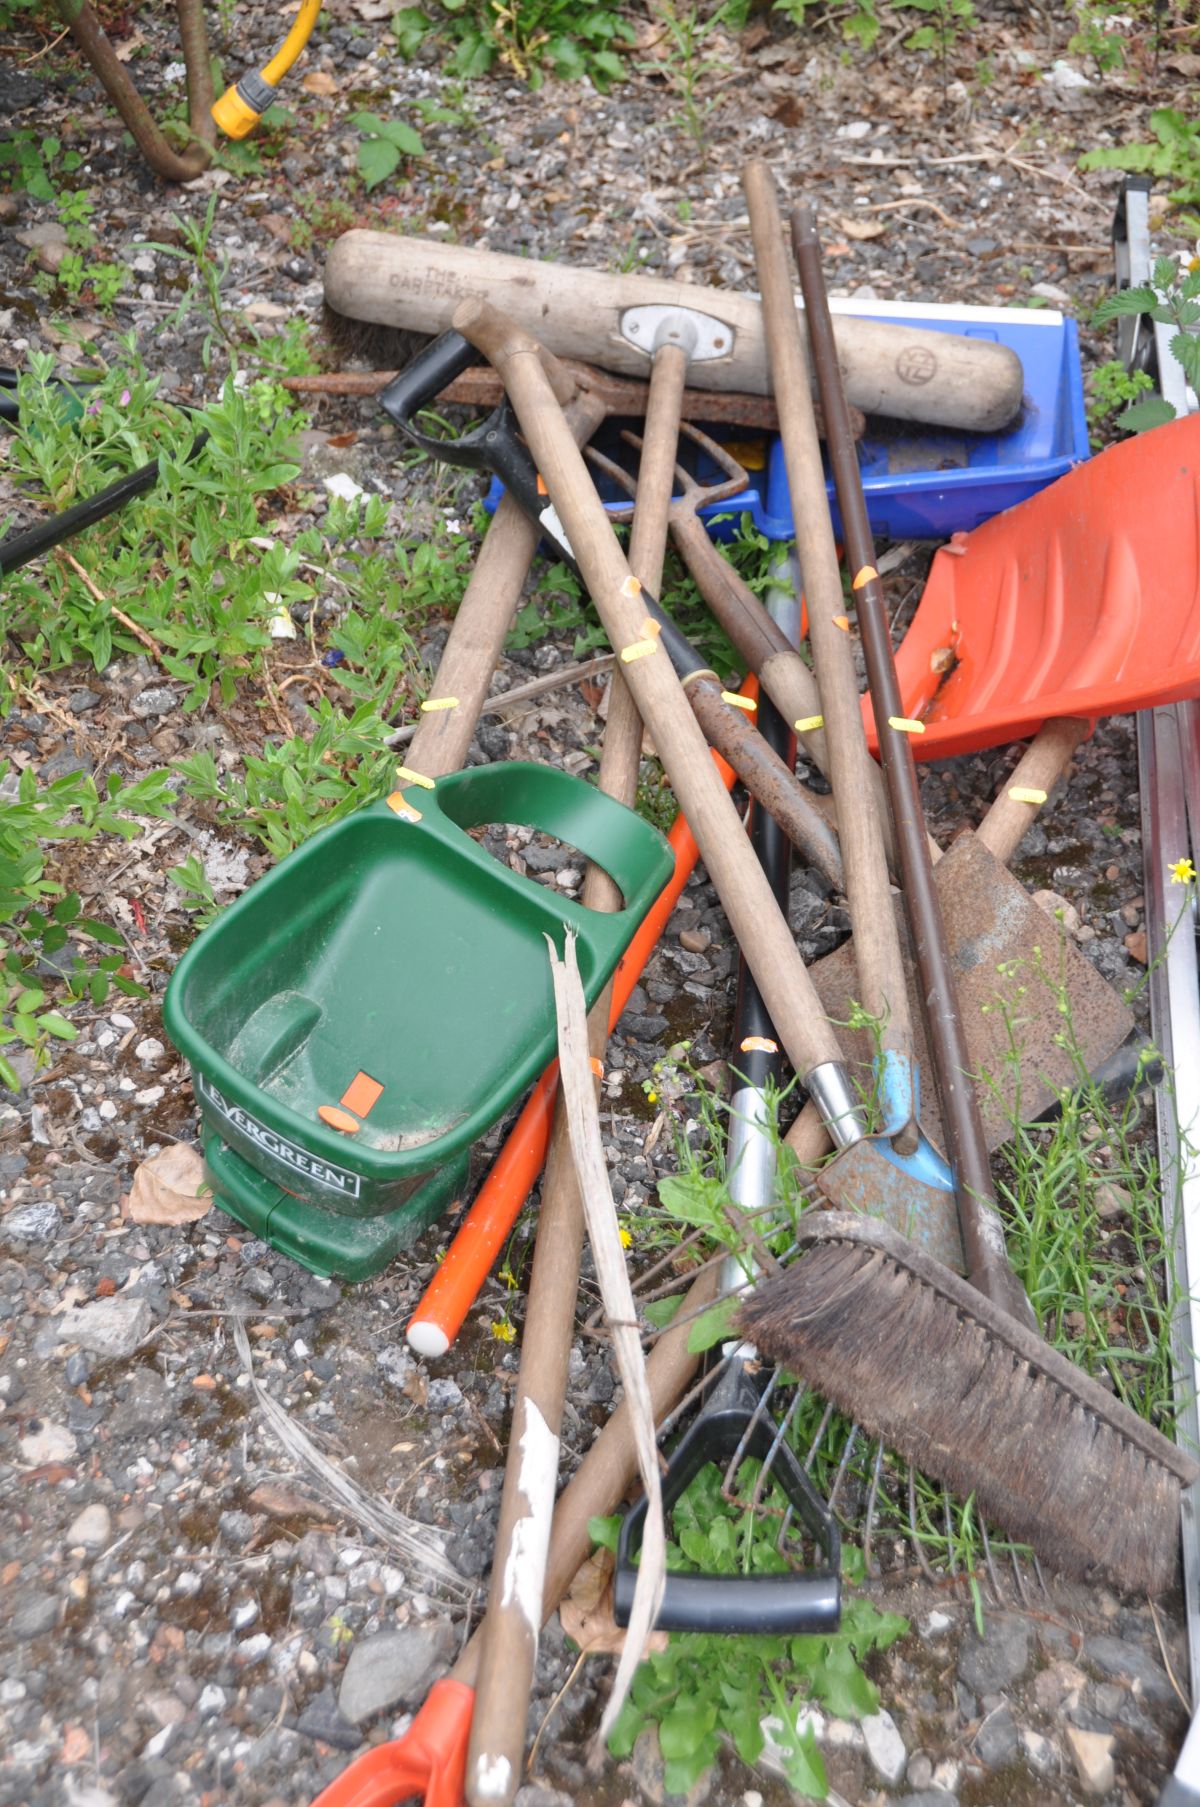 A QUANTITY OF GARDEN TOOLS AND A WHEELBARROW including spades, rakes, seed spreaders, hosepipe on - Image 2 of 3